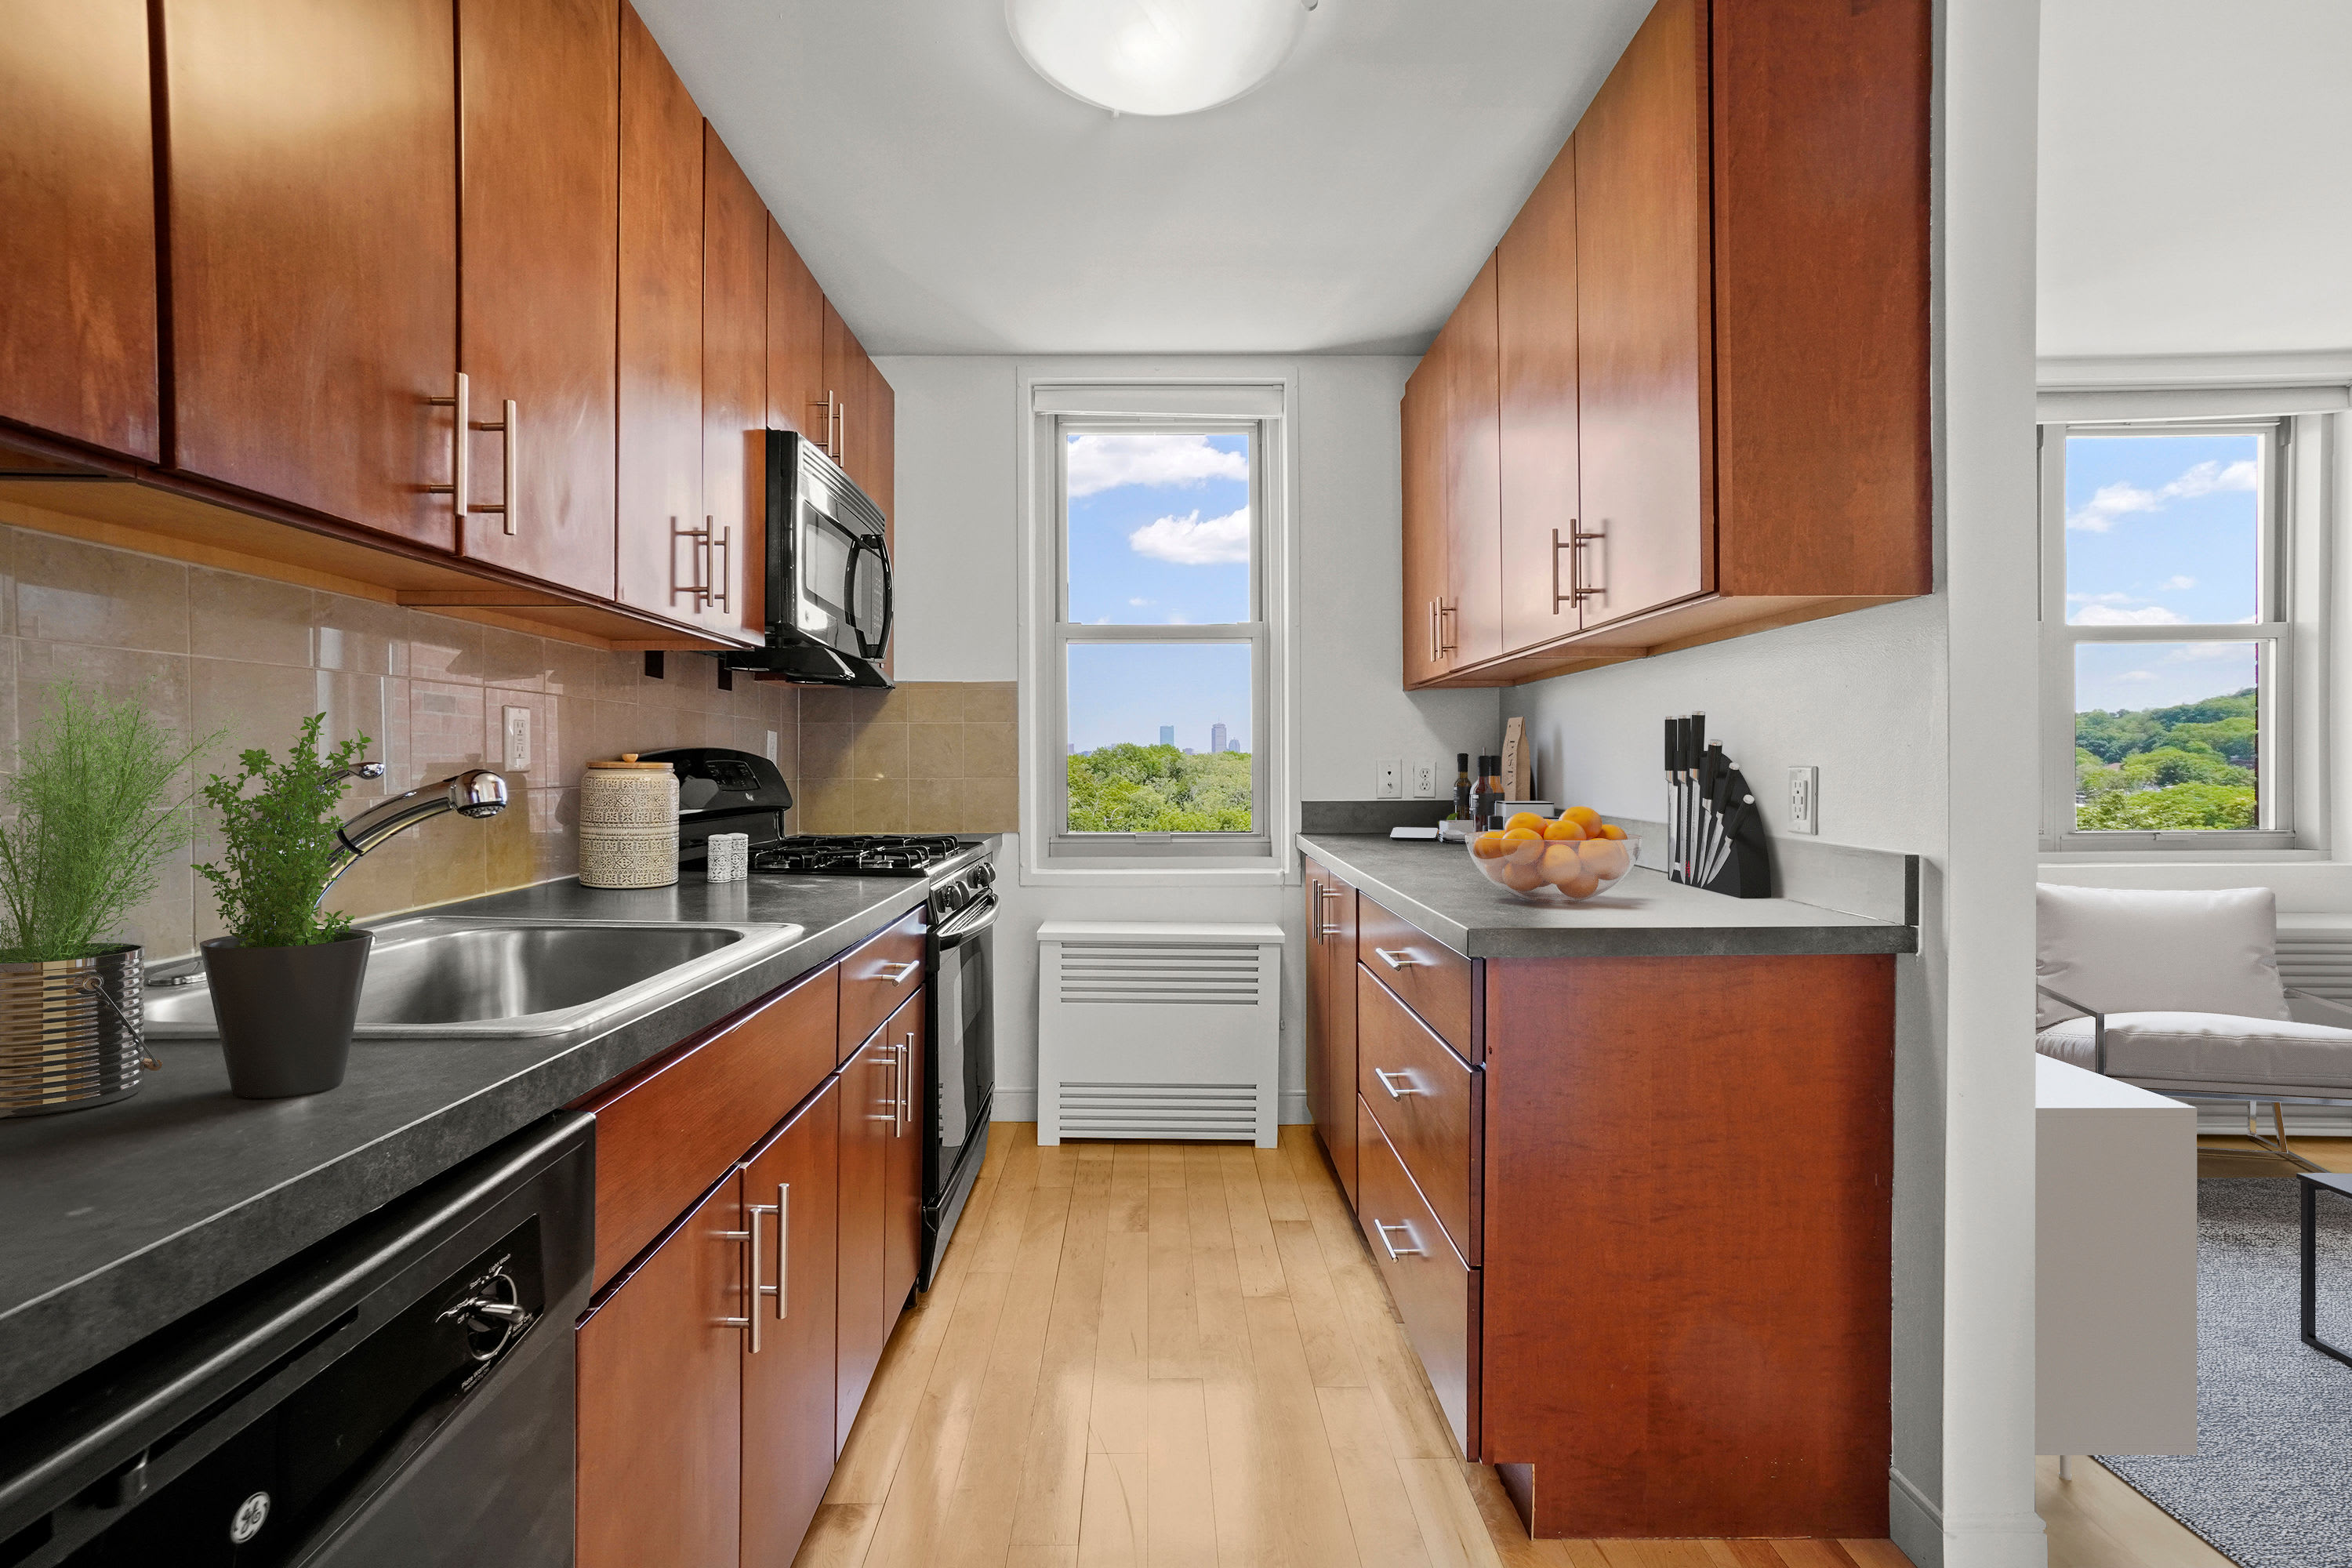 Camelot Court offers a kitchen in Brighton, Massachusetts